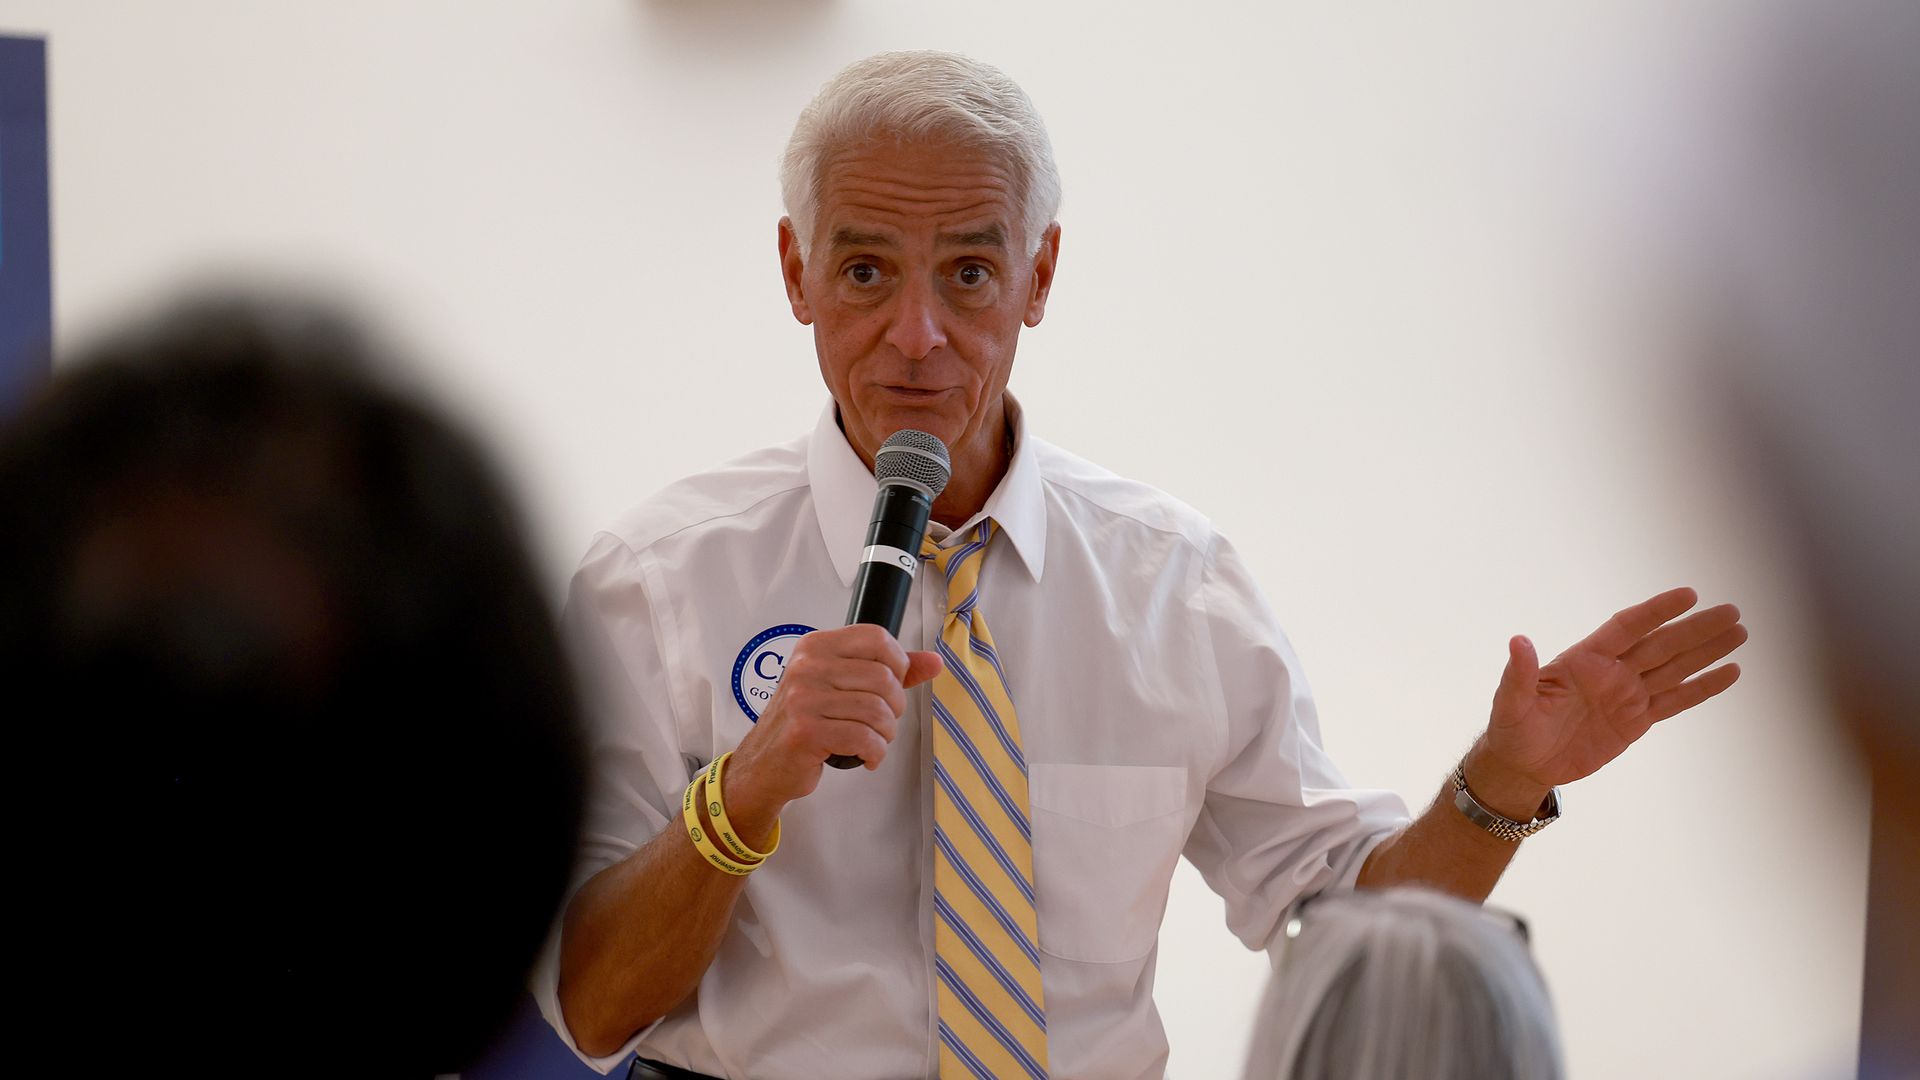 Democratic gubernatorial candidate Rep. Charlie Crist (D-FL) speaks during a campaign event at the Pembroke Pines Jewish Center on August 17, 2022